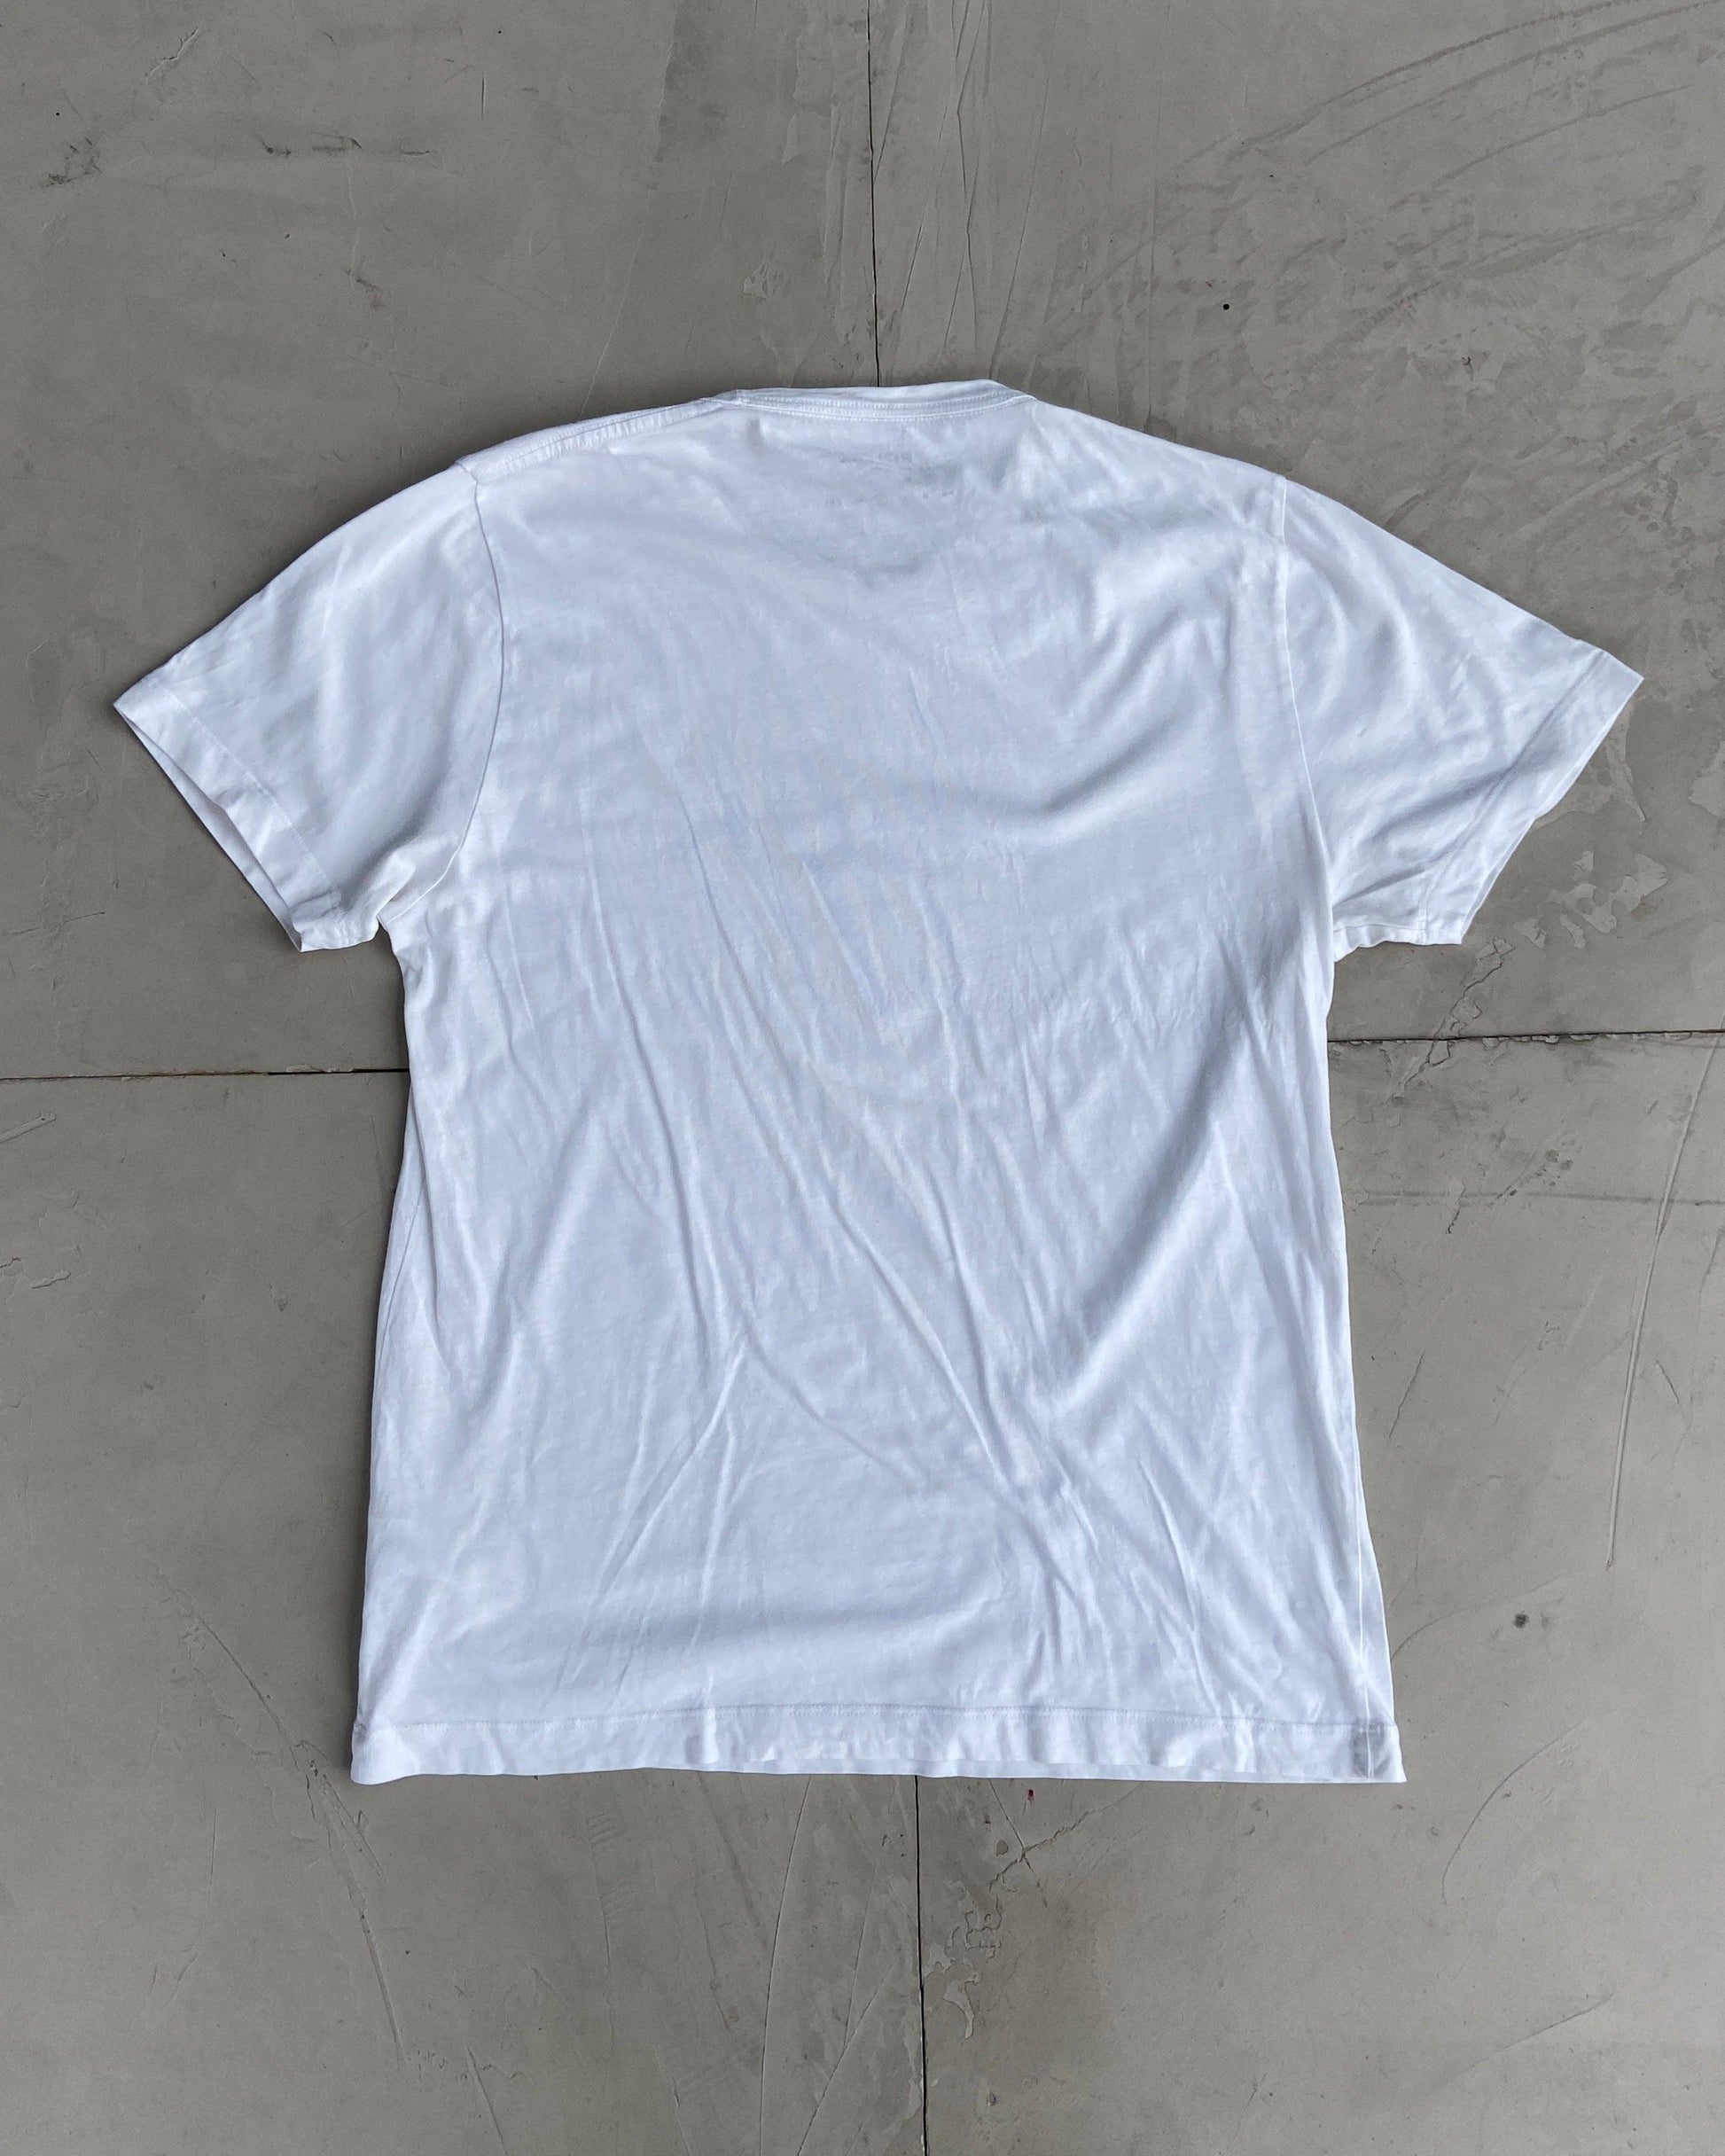 FCUK 2000'S WHITE TEE - L - Known Source